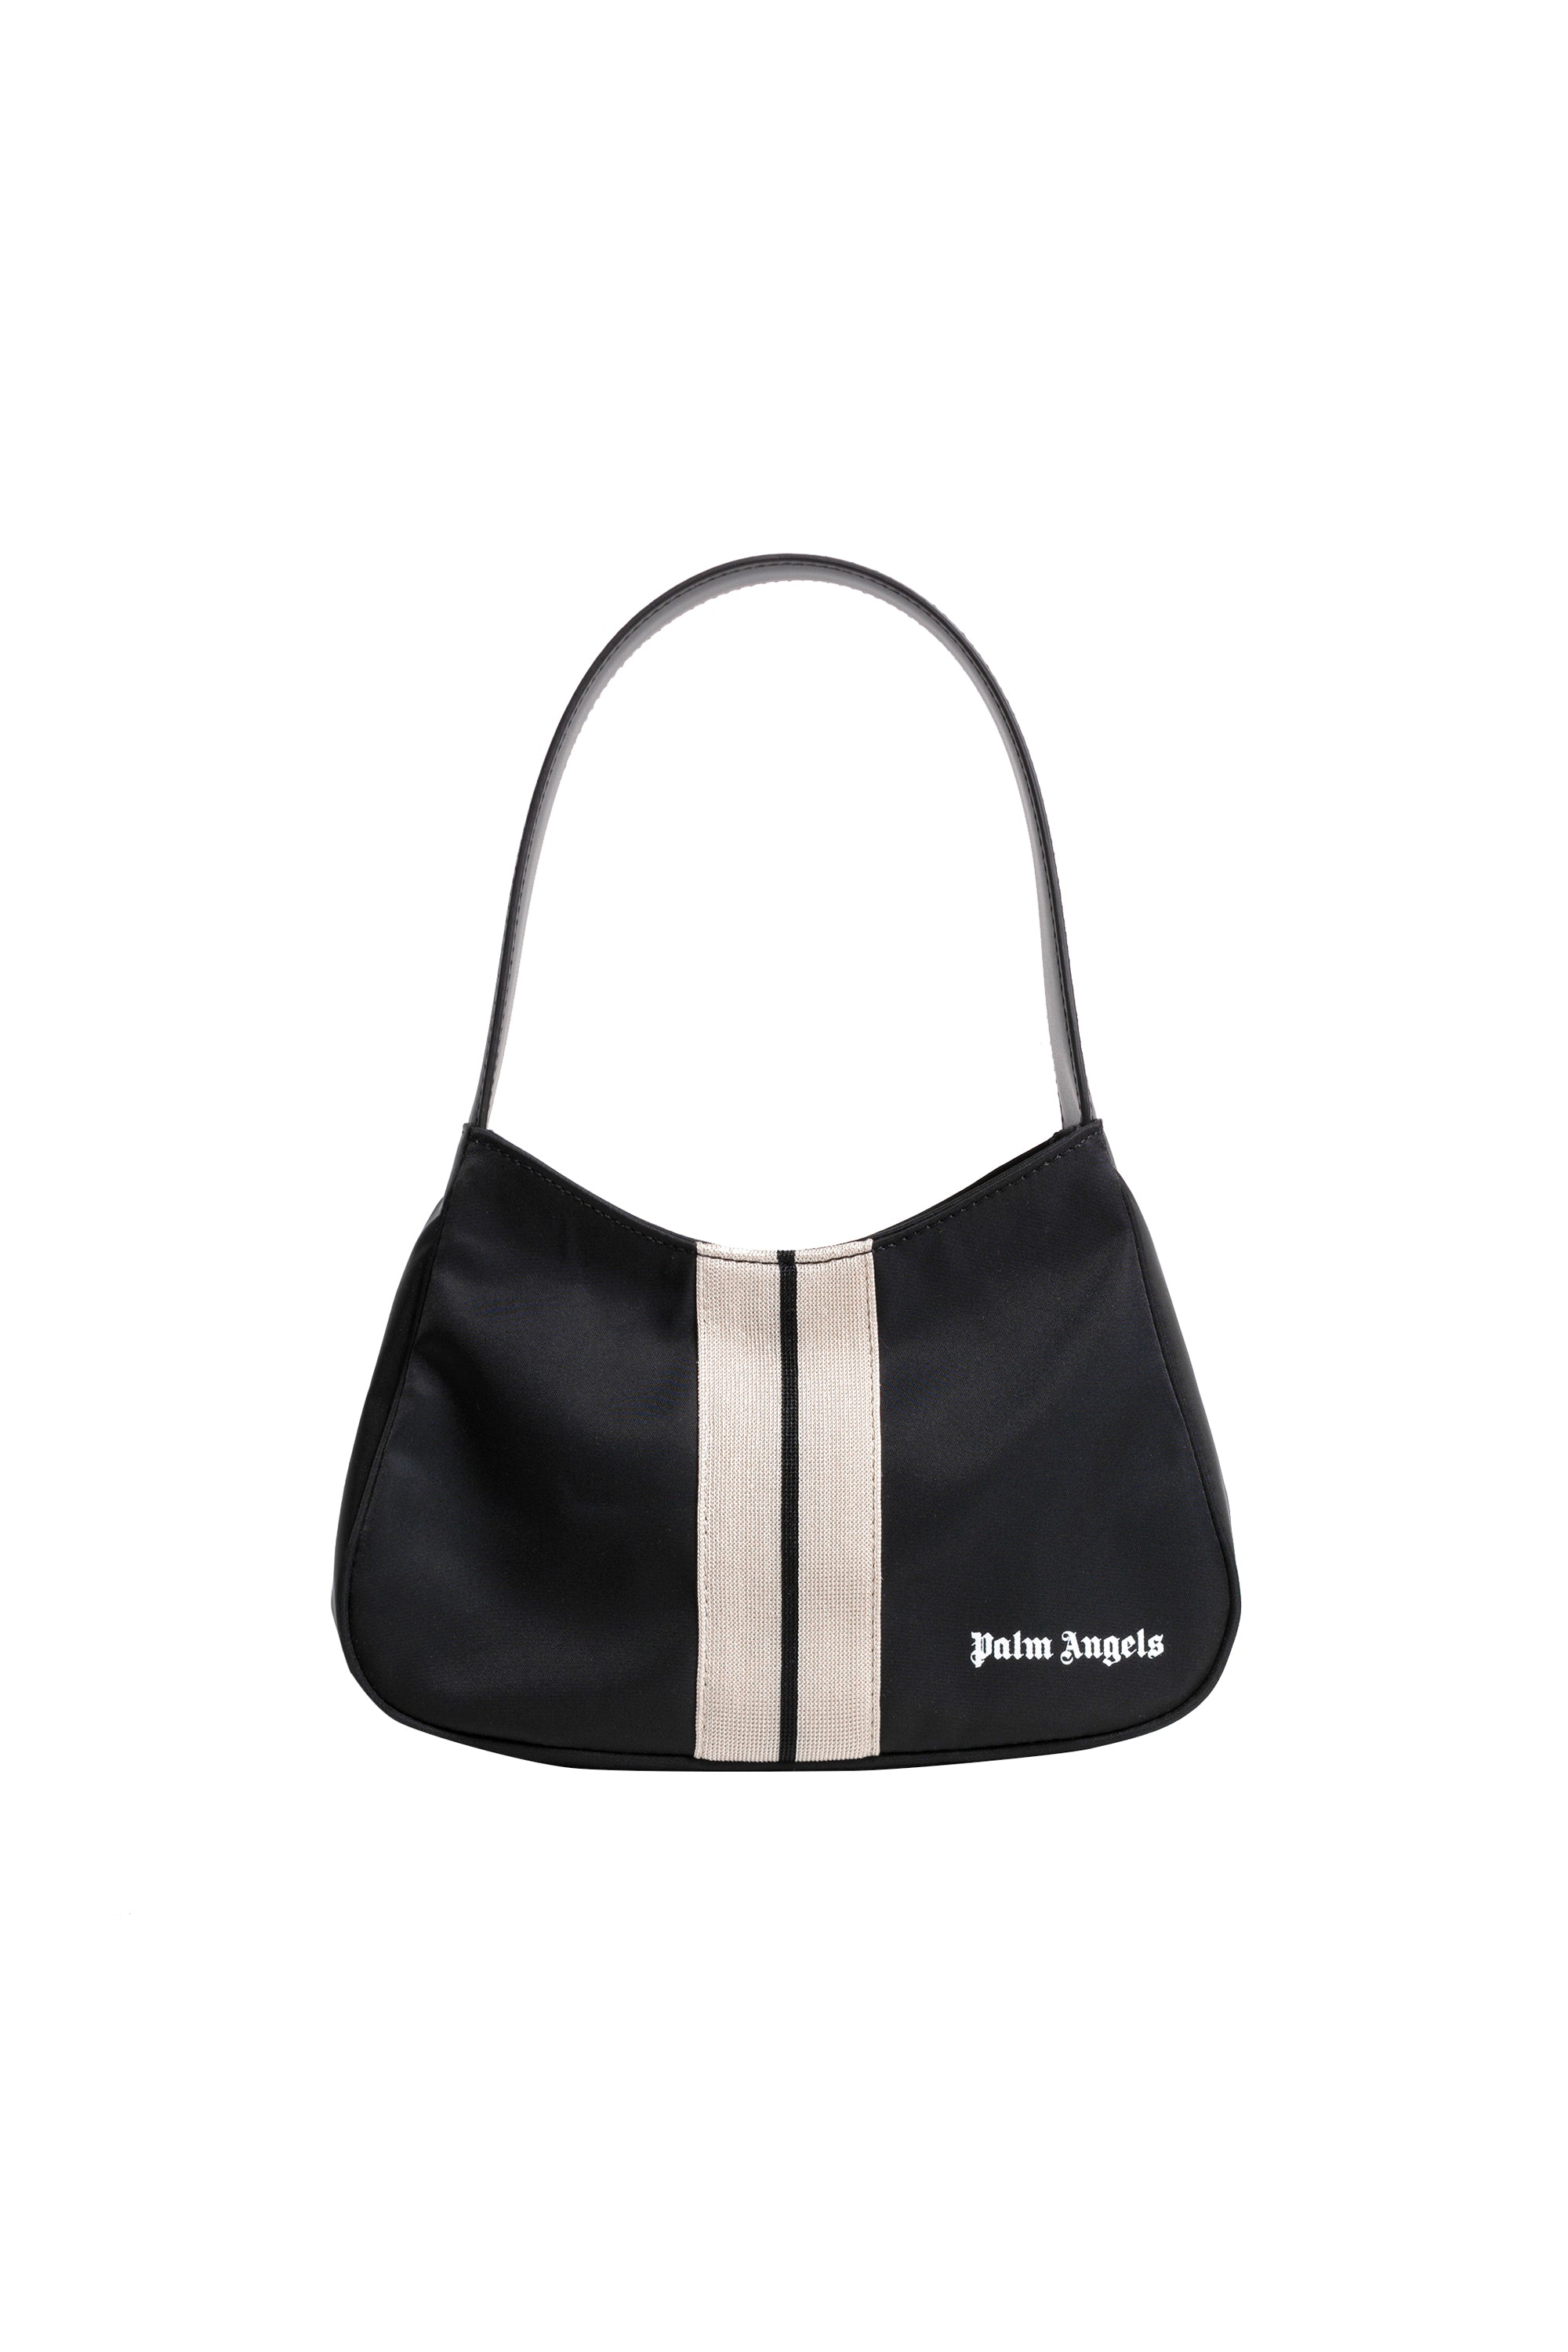 Minimalist small shoulder pouch in leather VENISE model Black